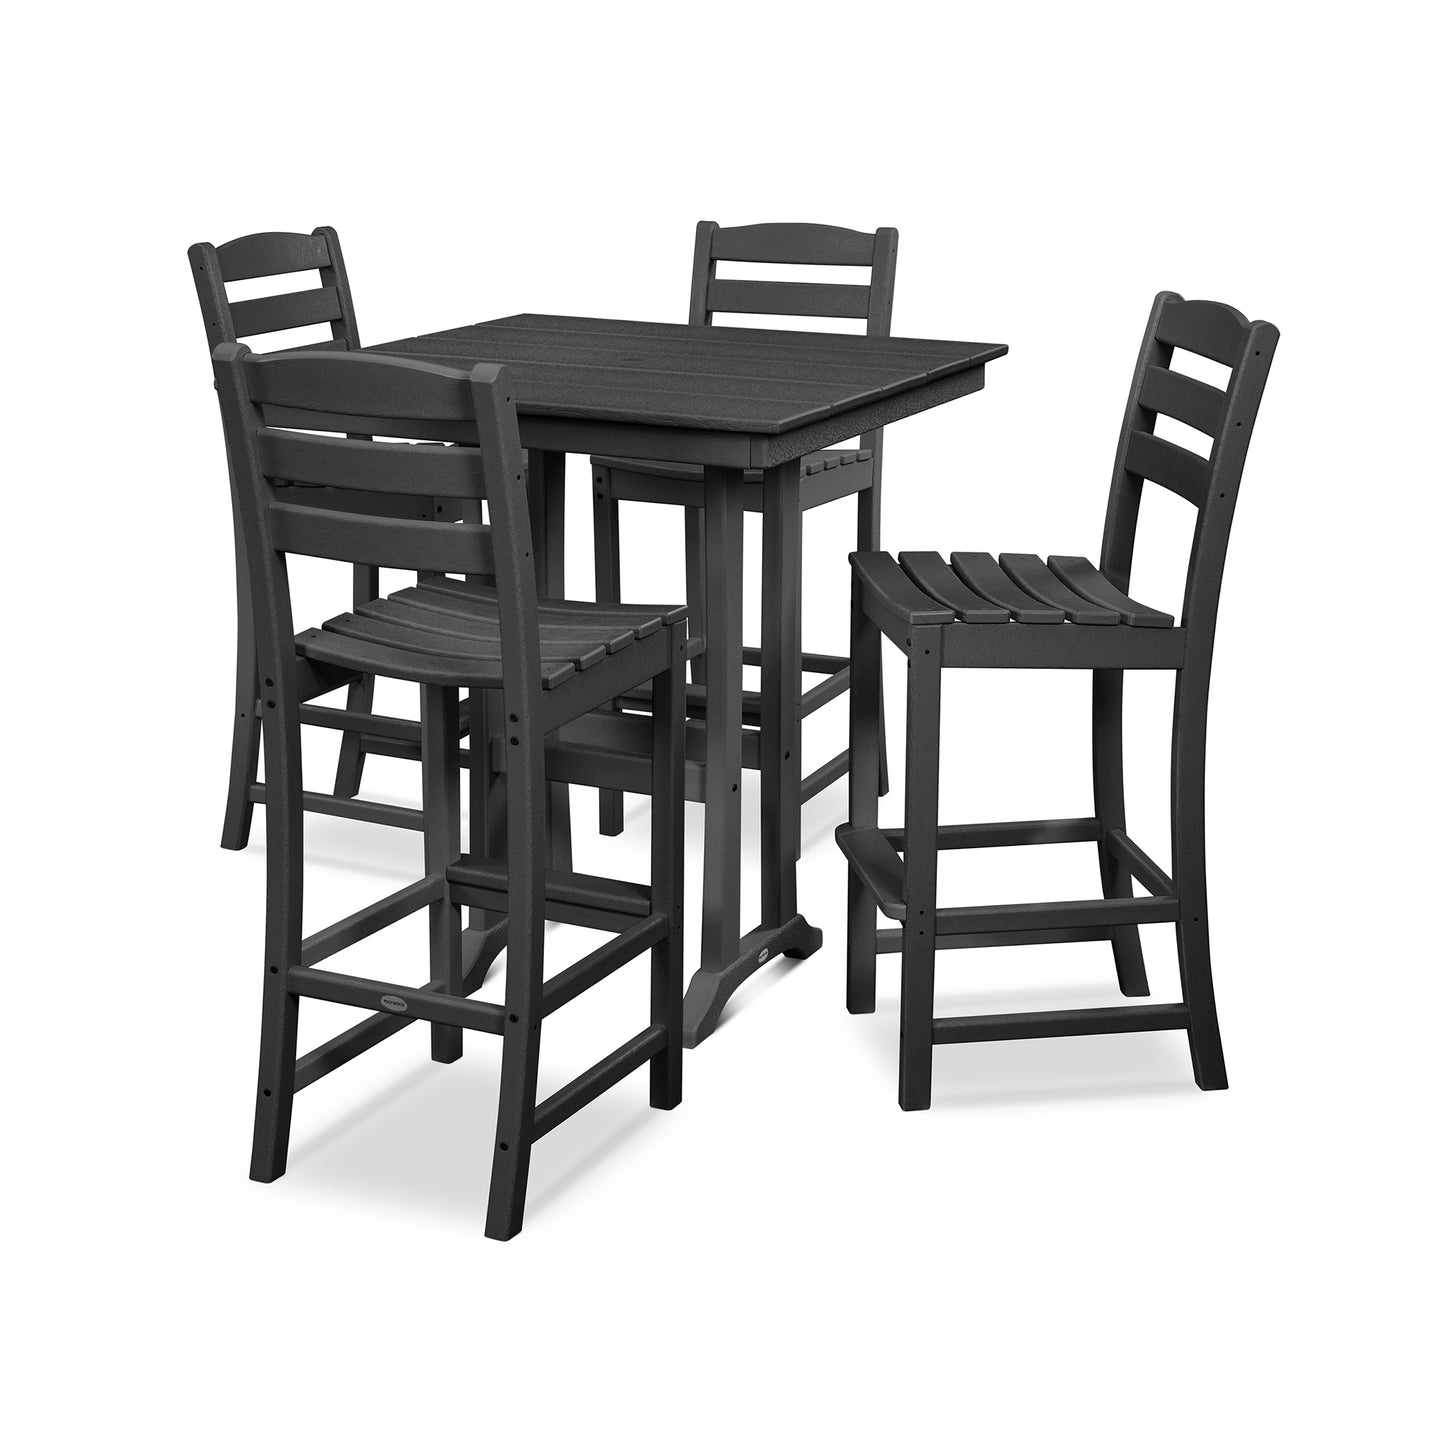 A set of modern all-weather outdoor bar furniture, consisting of a high square table and four tall chairs, all made of dark gray POLYWOOD® lumber, isolated on a white background.